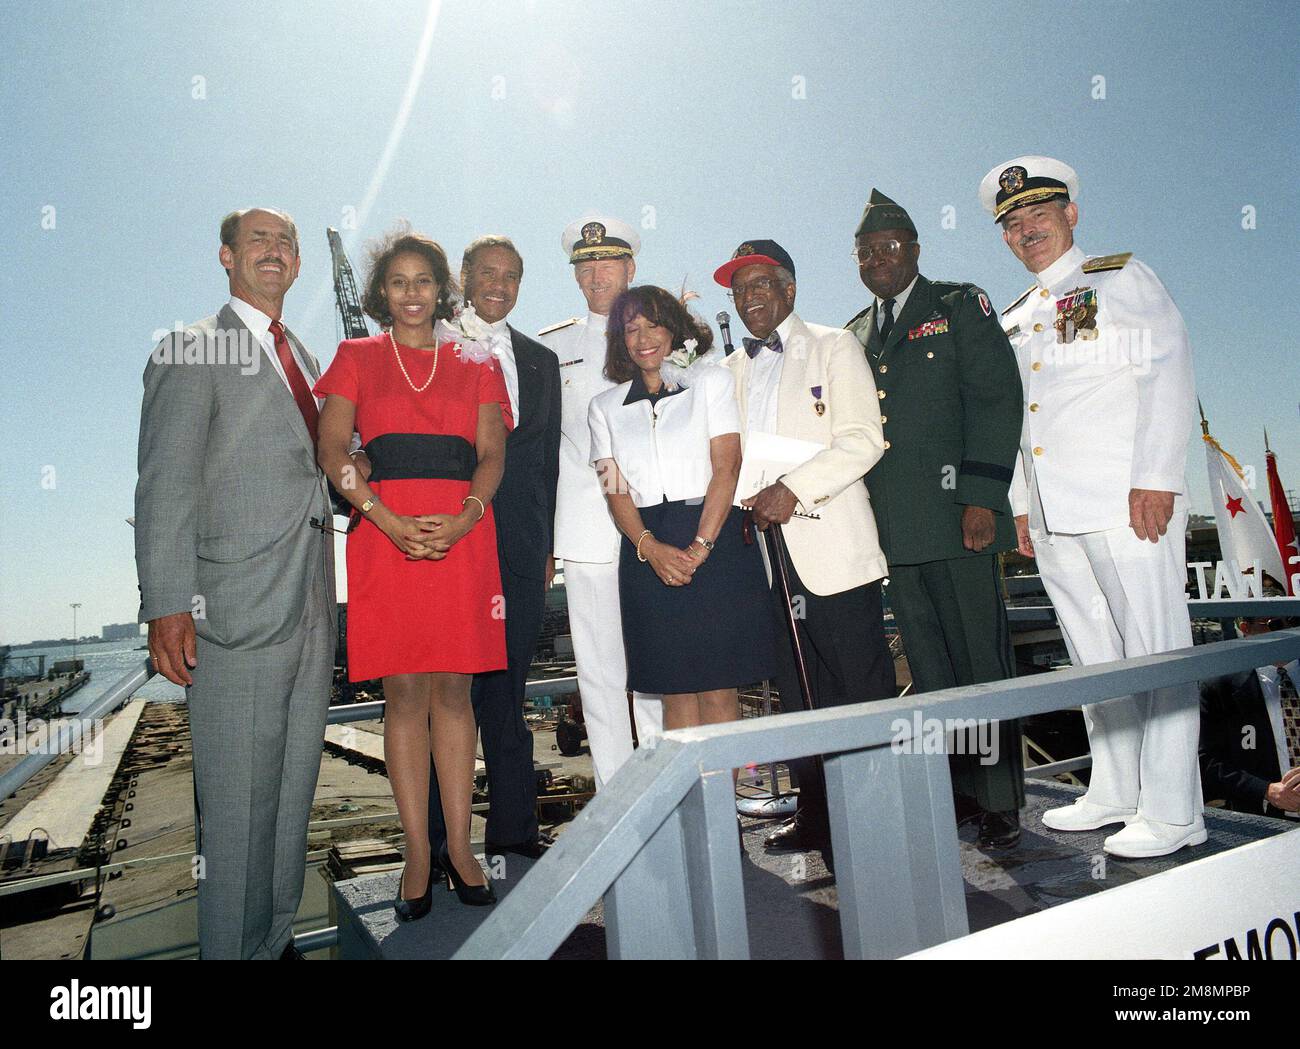 View of the official christening and launch party for the Military Sealift Command (MCS) Bob Hope class vehicle transport ship USNS WATSON (T-AKR-310). (Left to right): Richard A. Vortmann, NASSCO President; Ms. Hilary West, Maid of Honor; Secretary of the Army Togo D. West Jr.; Rear Admiral William H. Butler, USNR, Deputy Commander NavSurFor Pacific; Mrs. Gail Berry West, Sponsor; Mr. J. Gilford, honored guest; General Johnny Wilson, USA, Commanding General, Army Material Command; and Rear Admiral David P. Sargent Jr. USN, NavSeaSysCom (R&D). Base: San Diego State: California (CA) Country: Un Stock Photo